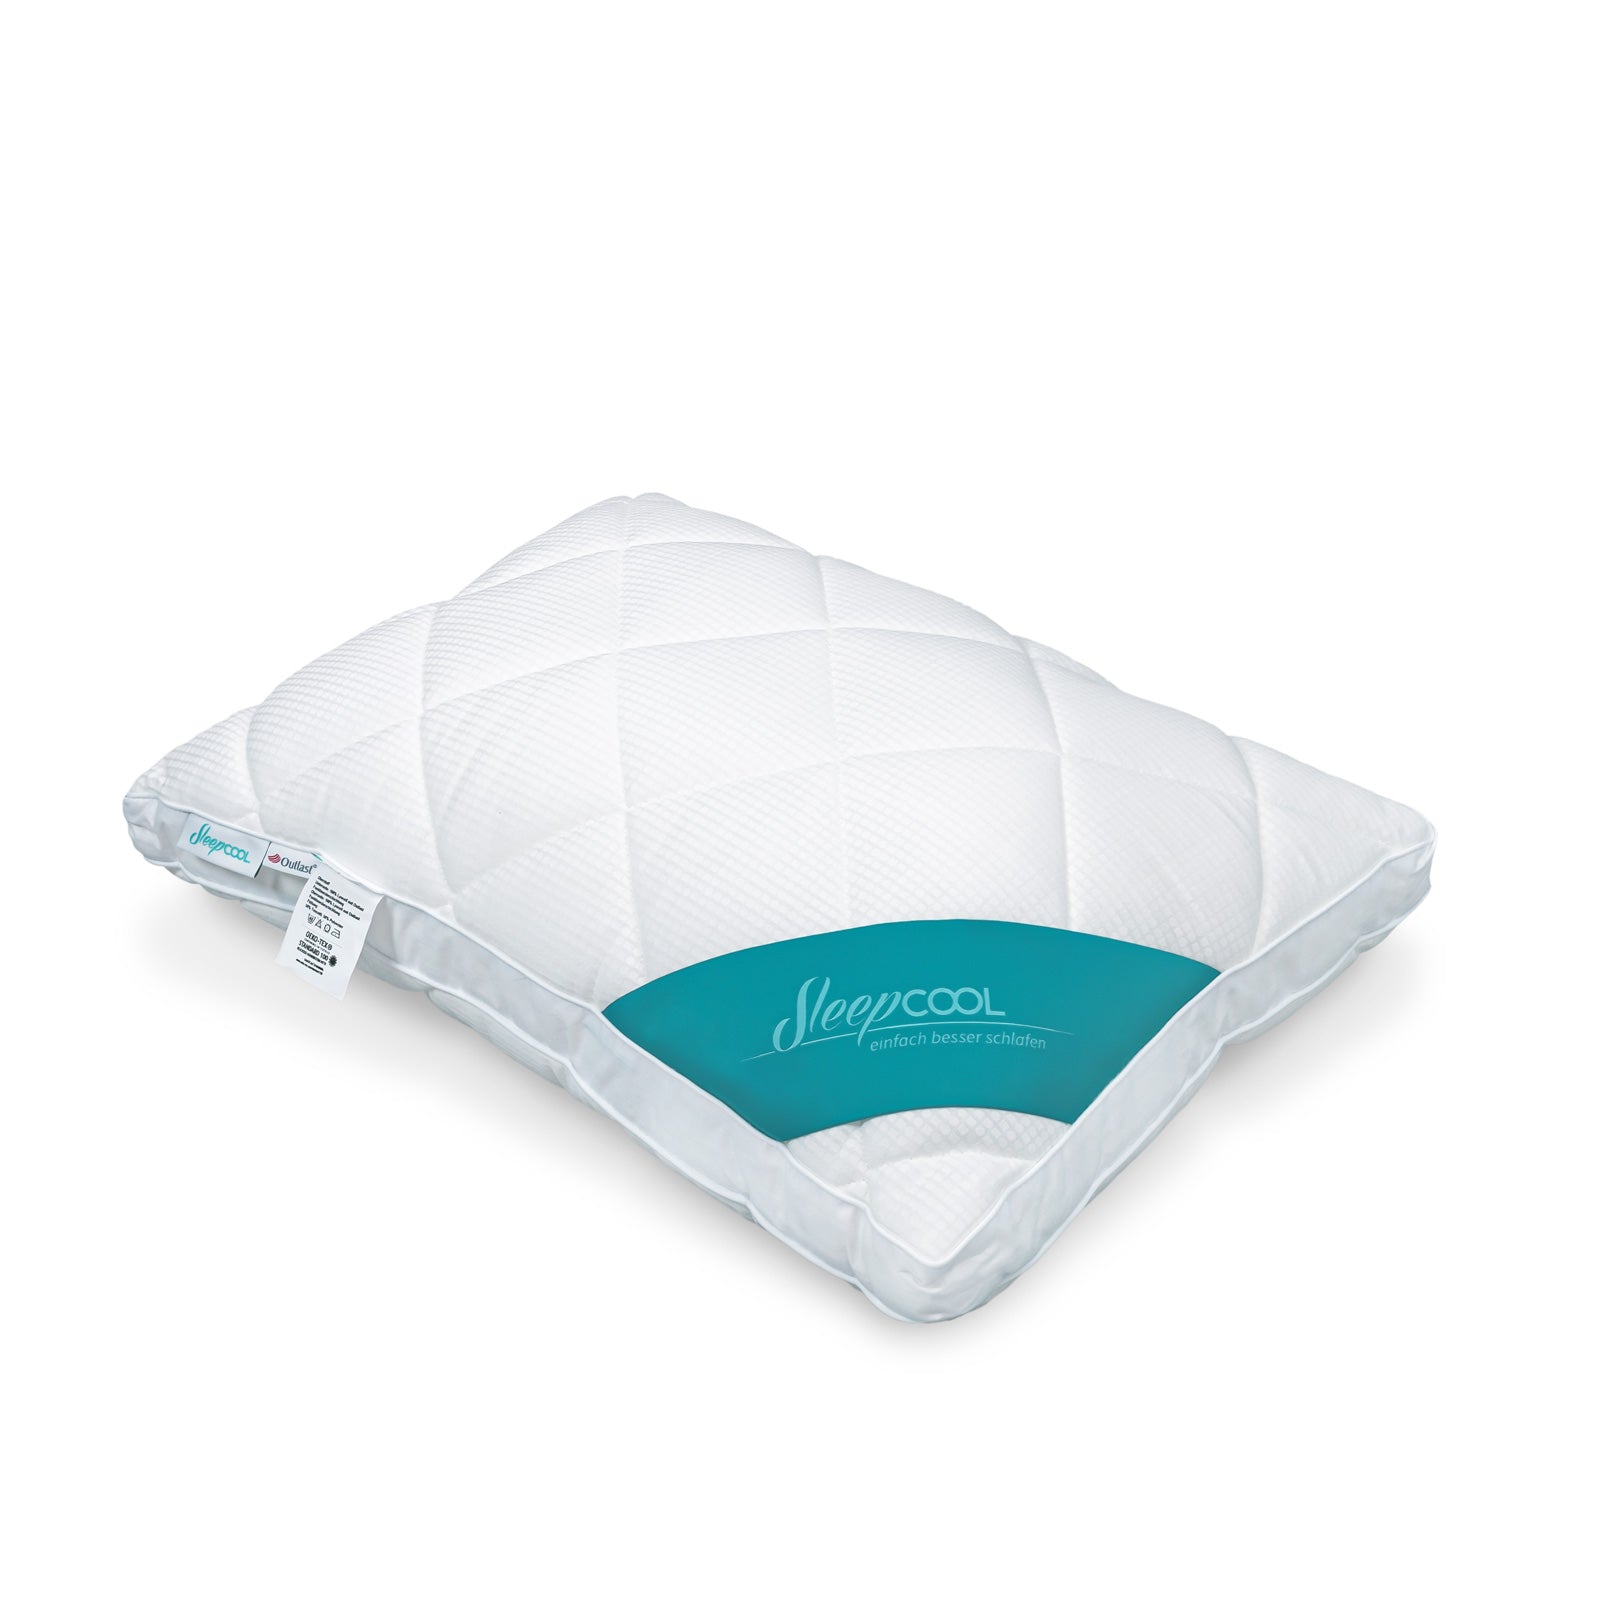 Chilling pillow COOL.MOMENTS-Voluminous, breathable and climate-friendly cushion